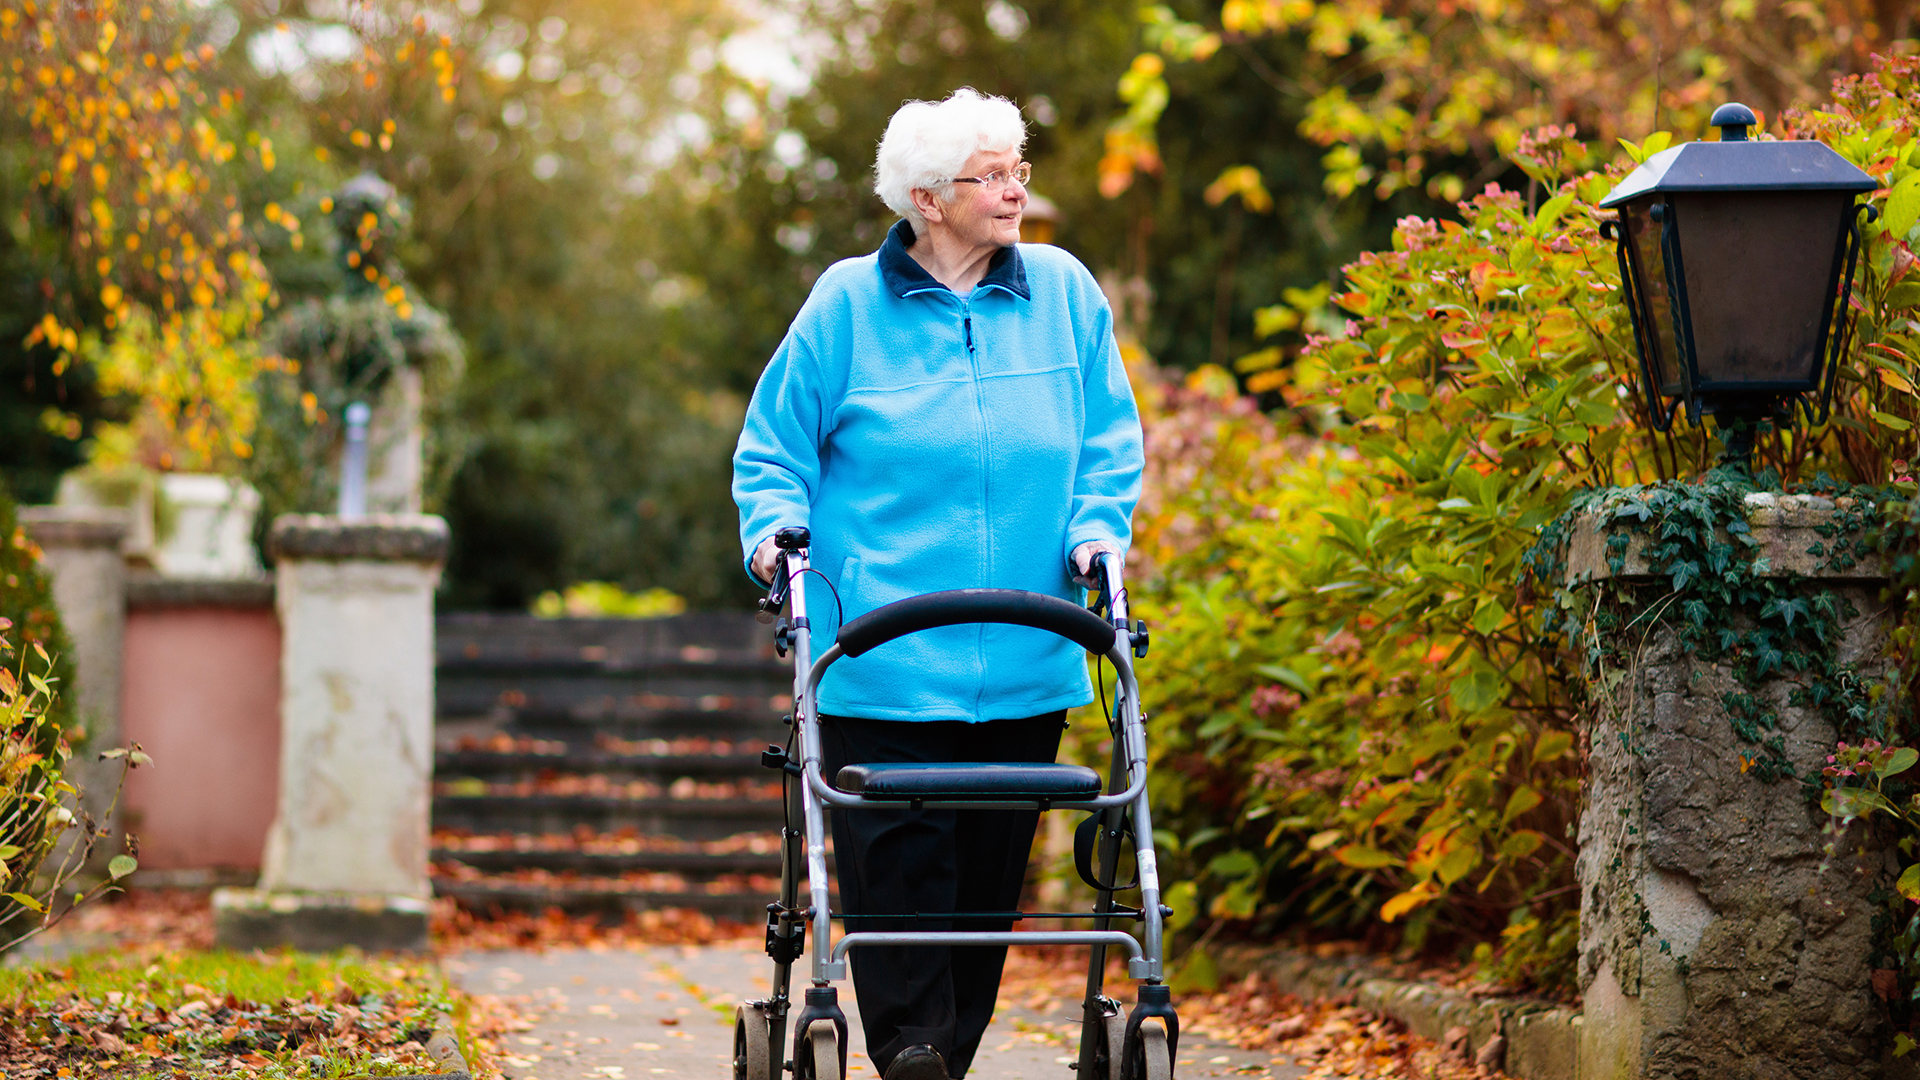 Happy senior handicapped lady with a walking disability enjoying a walk in an autumn park pushing her walker or wheel chair. Aid and support during retirement. Patient of nursing home or care center.